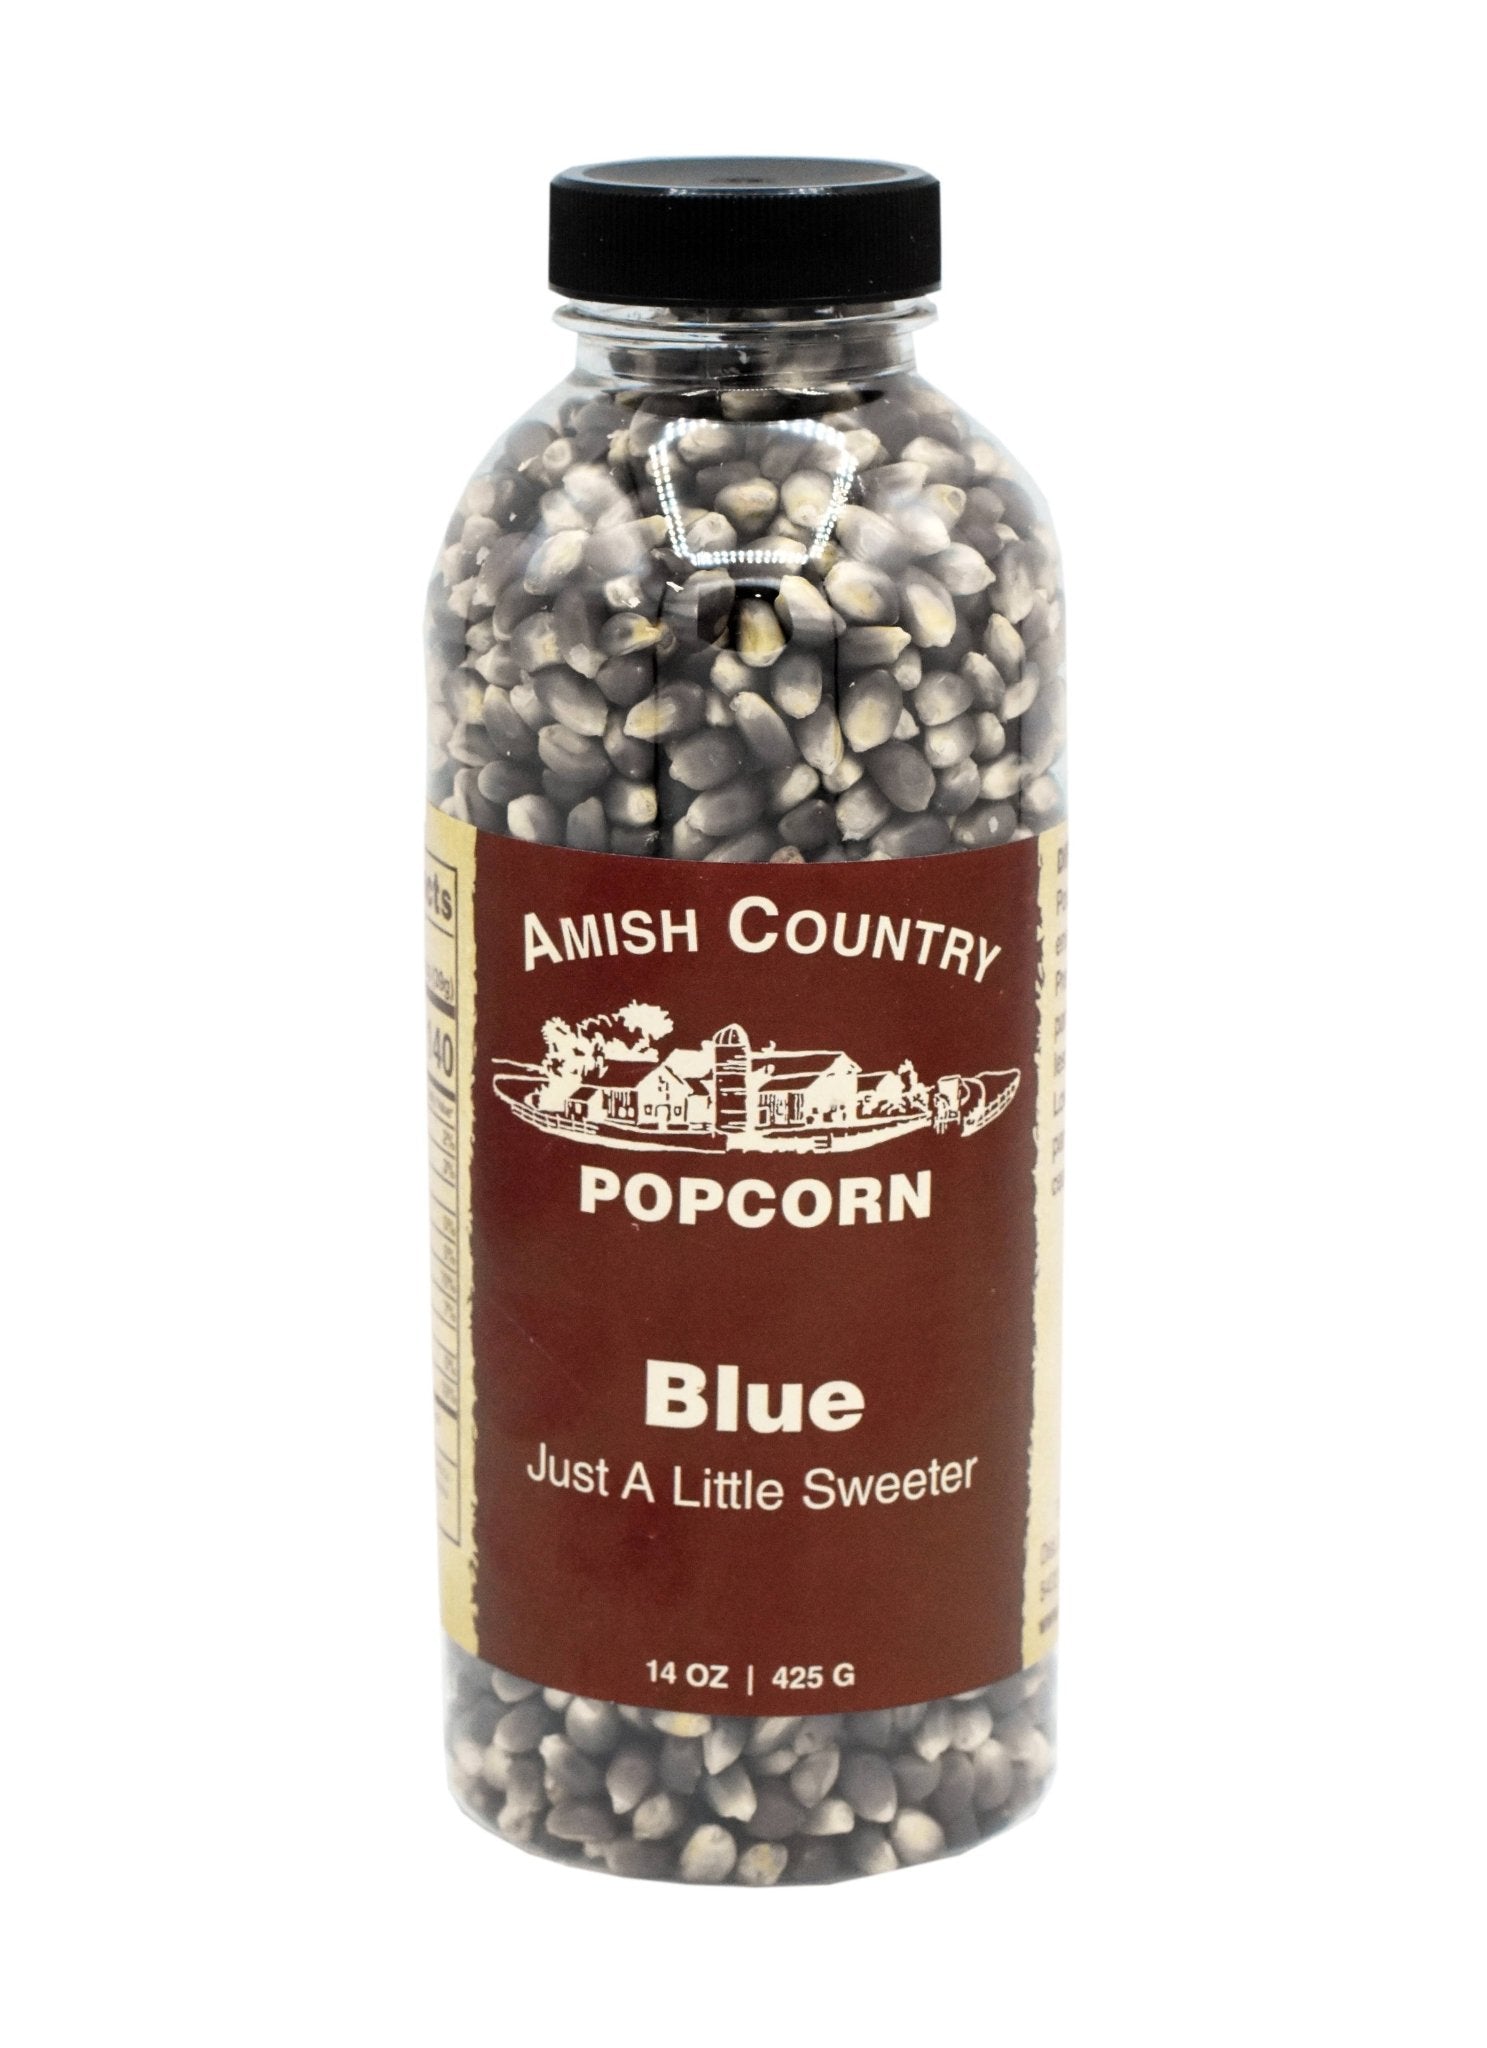 Amish Country Popcorn - 14oz Bottle of Blue Popcorn - Pacific Flyway Supplies